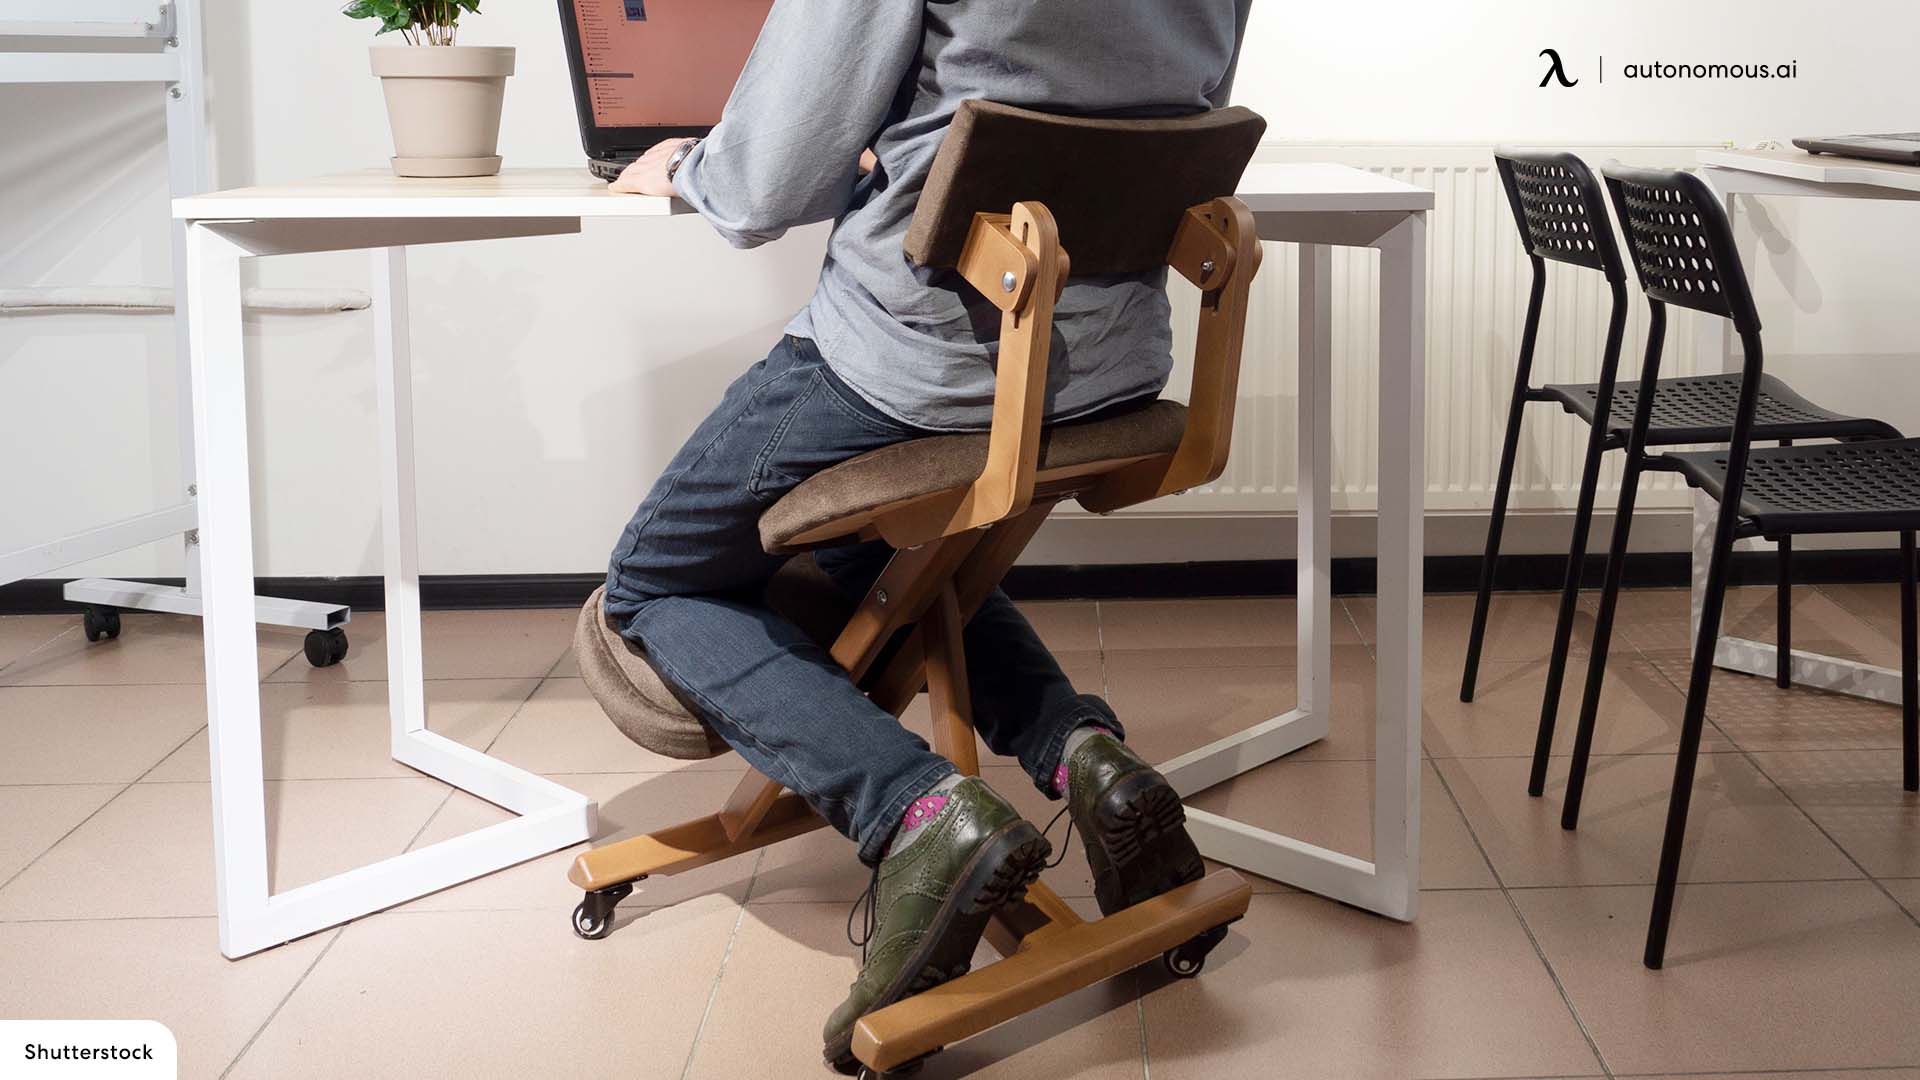 Benefits of Kneeling Chairs You Should Know